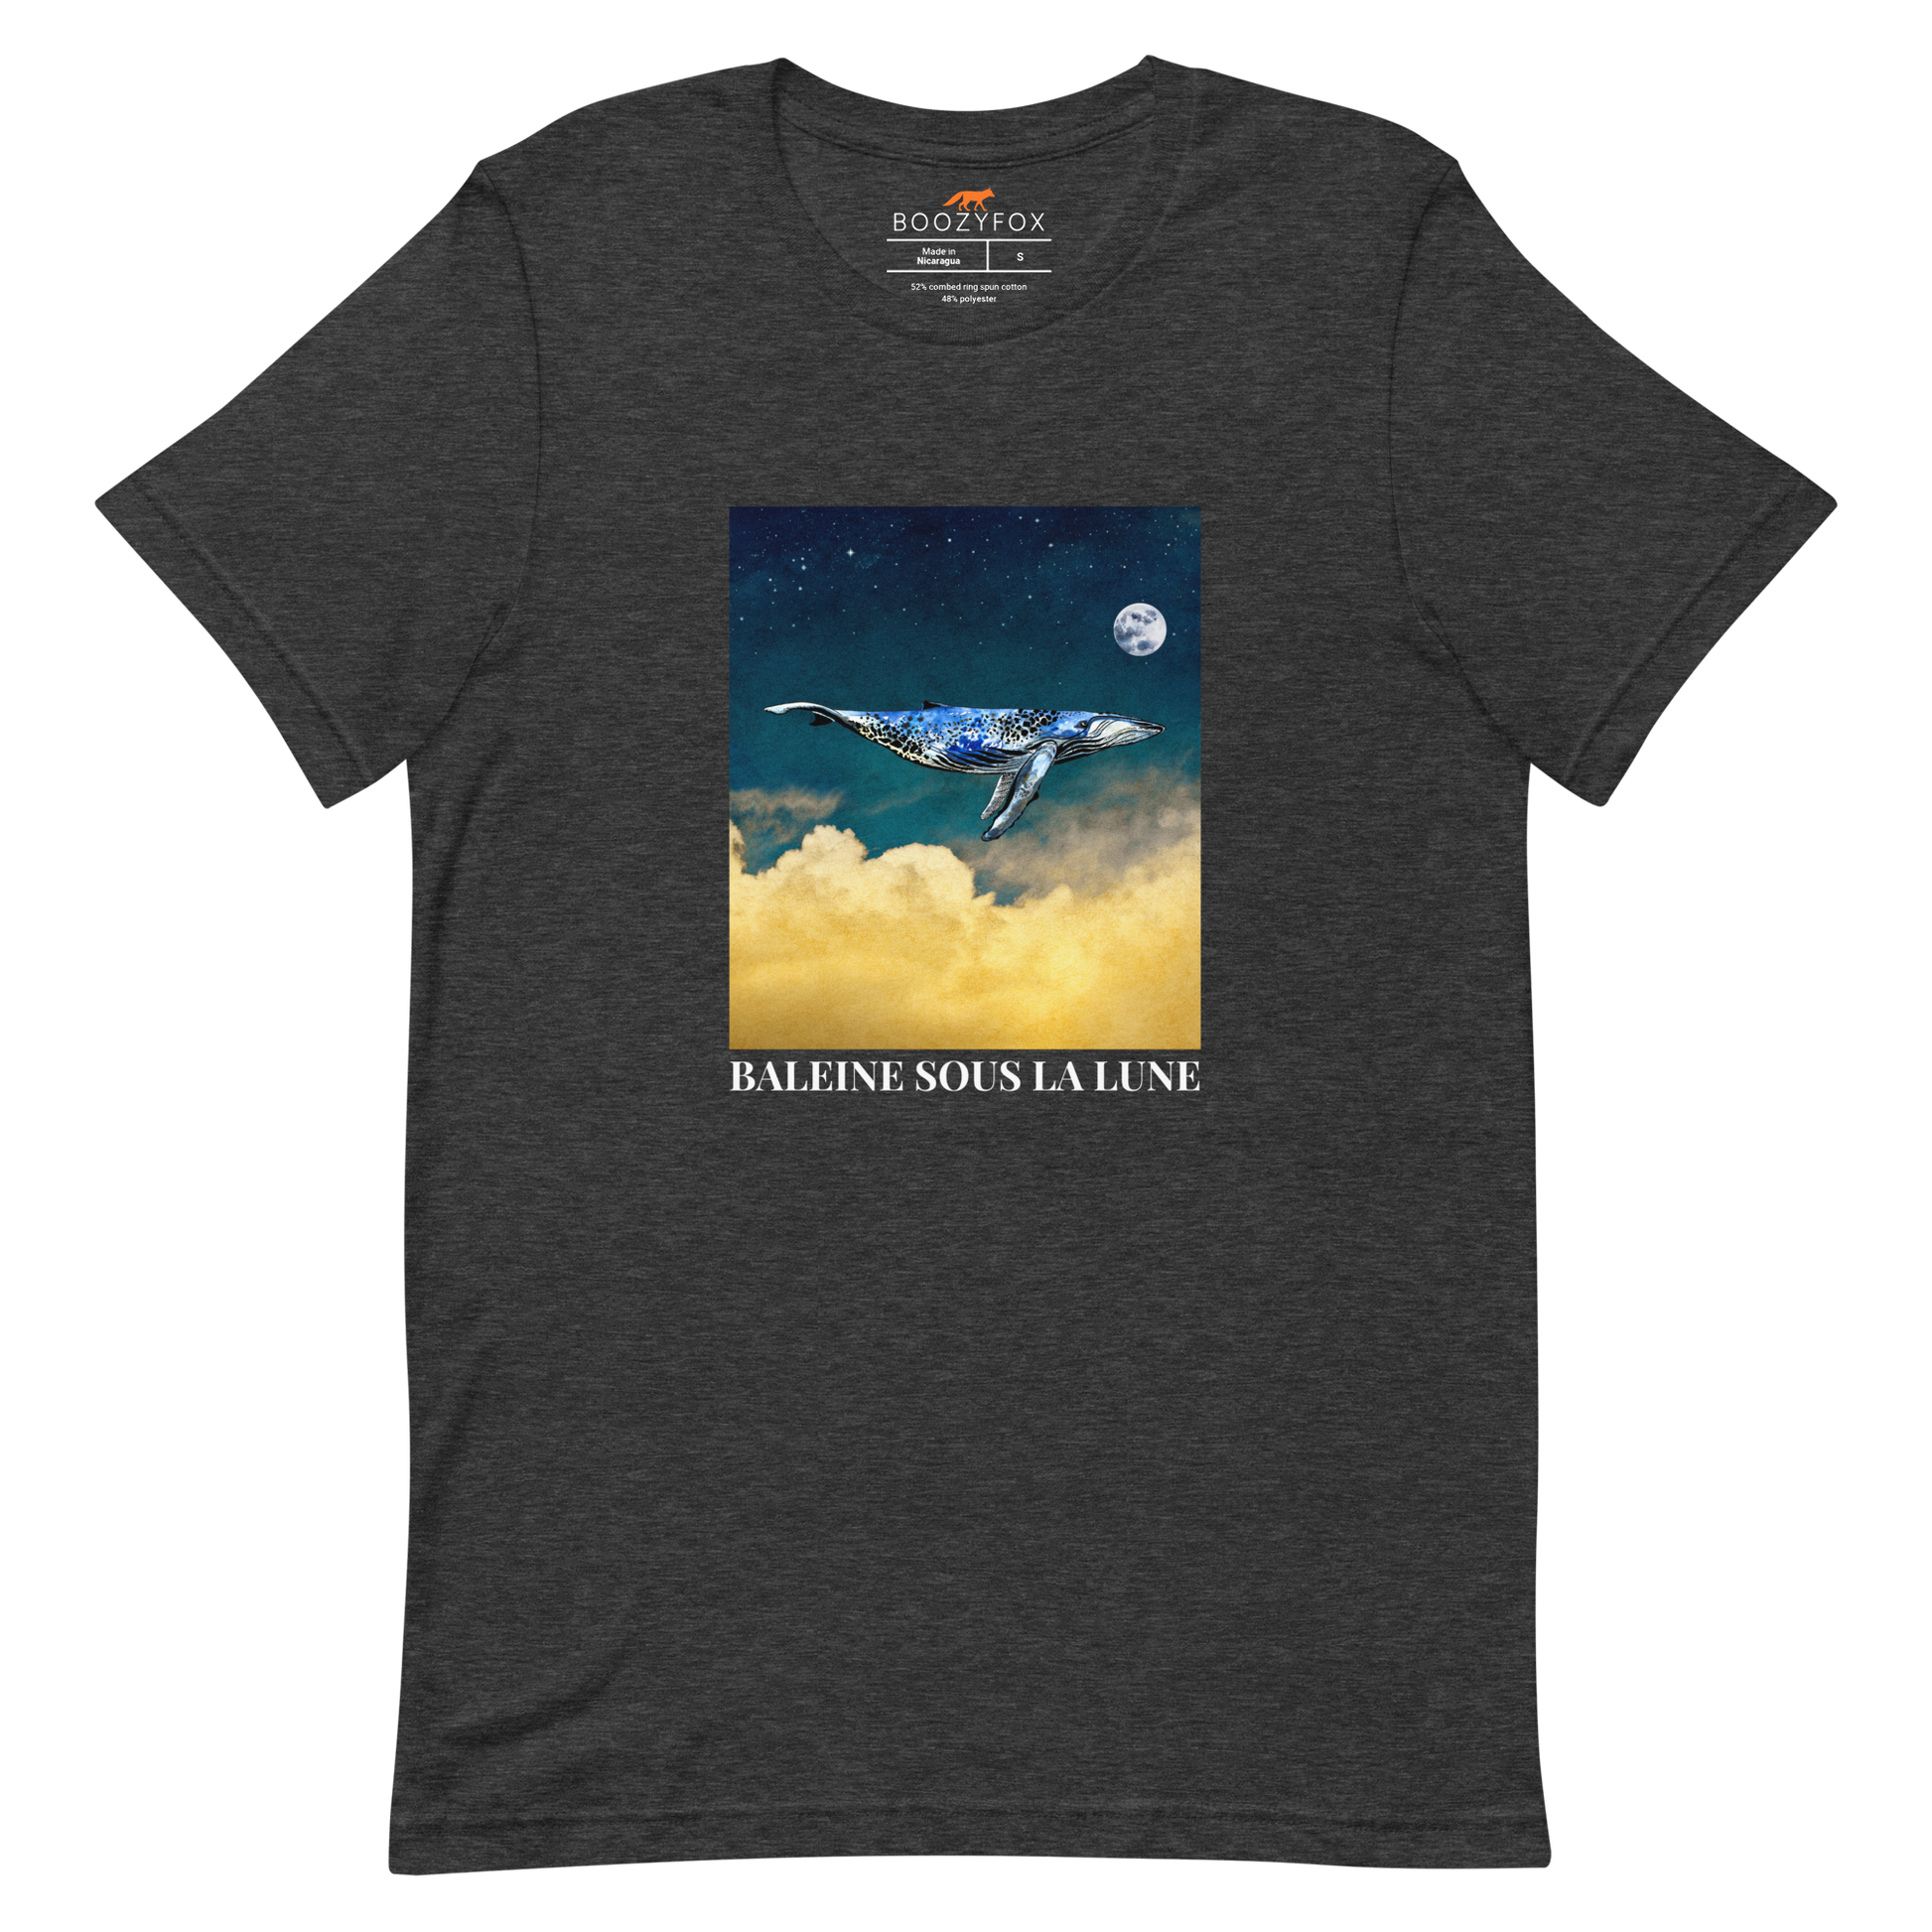 Dark Grey Heather Premium Whale T-Shirt featuring a majestic Whale Under The Moon graphic on the chest - Cool Graphic Whale Tees - Boozy Fox